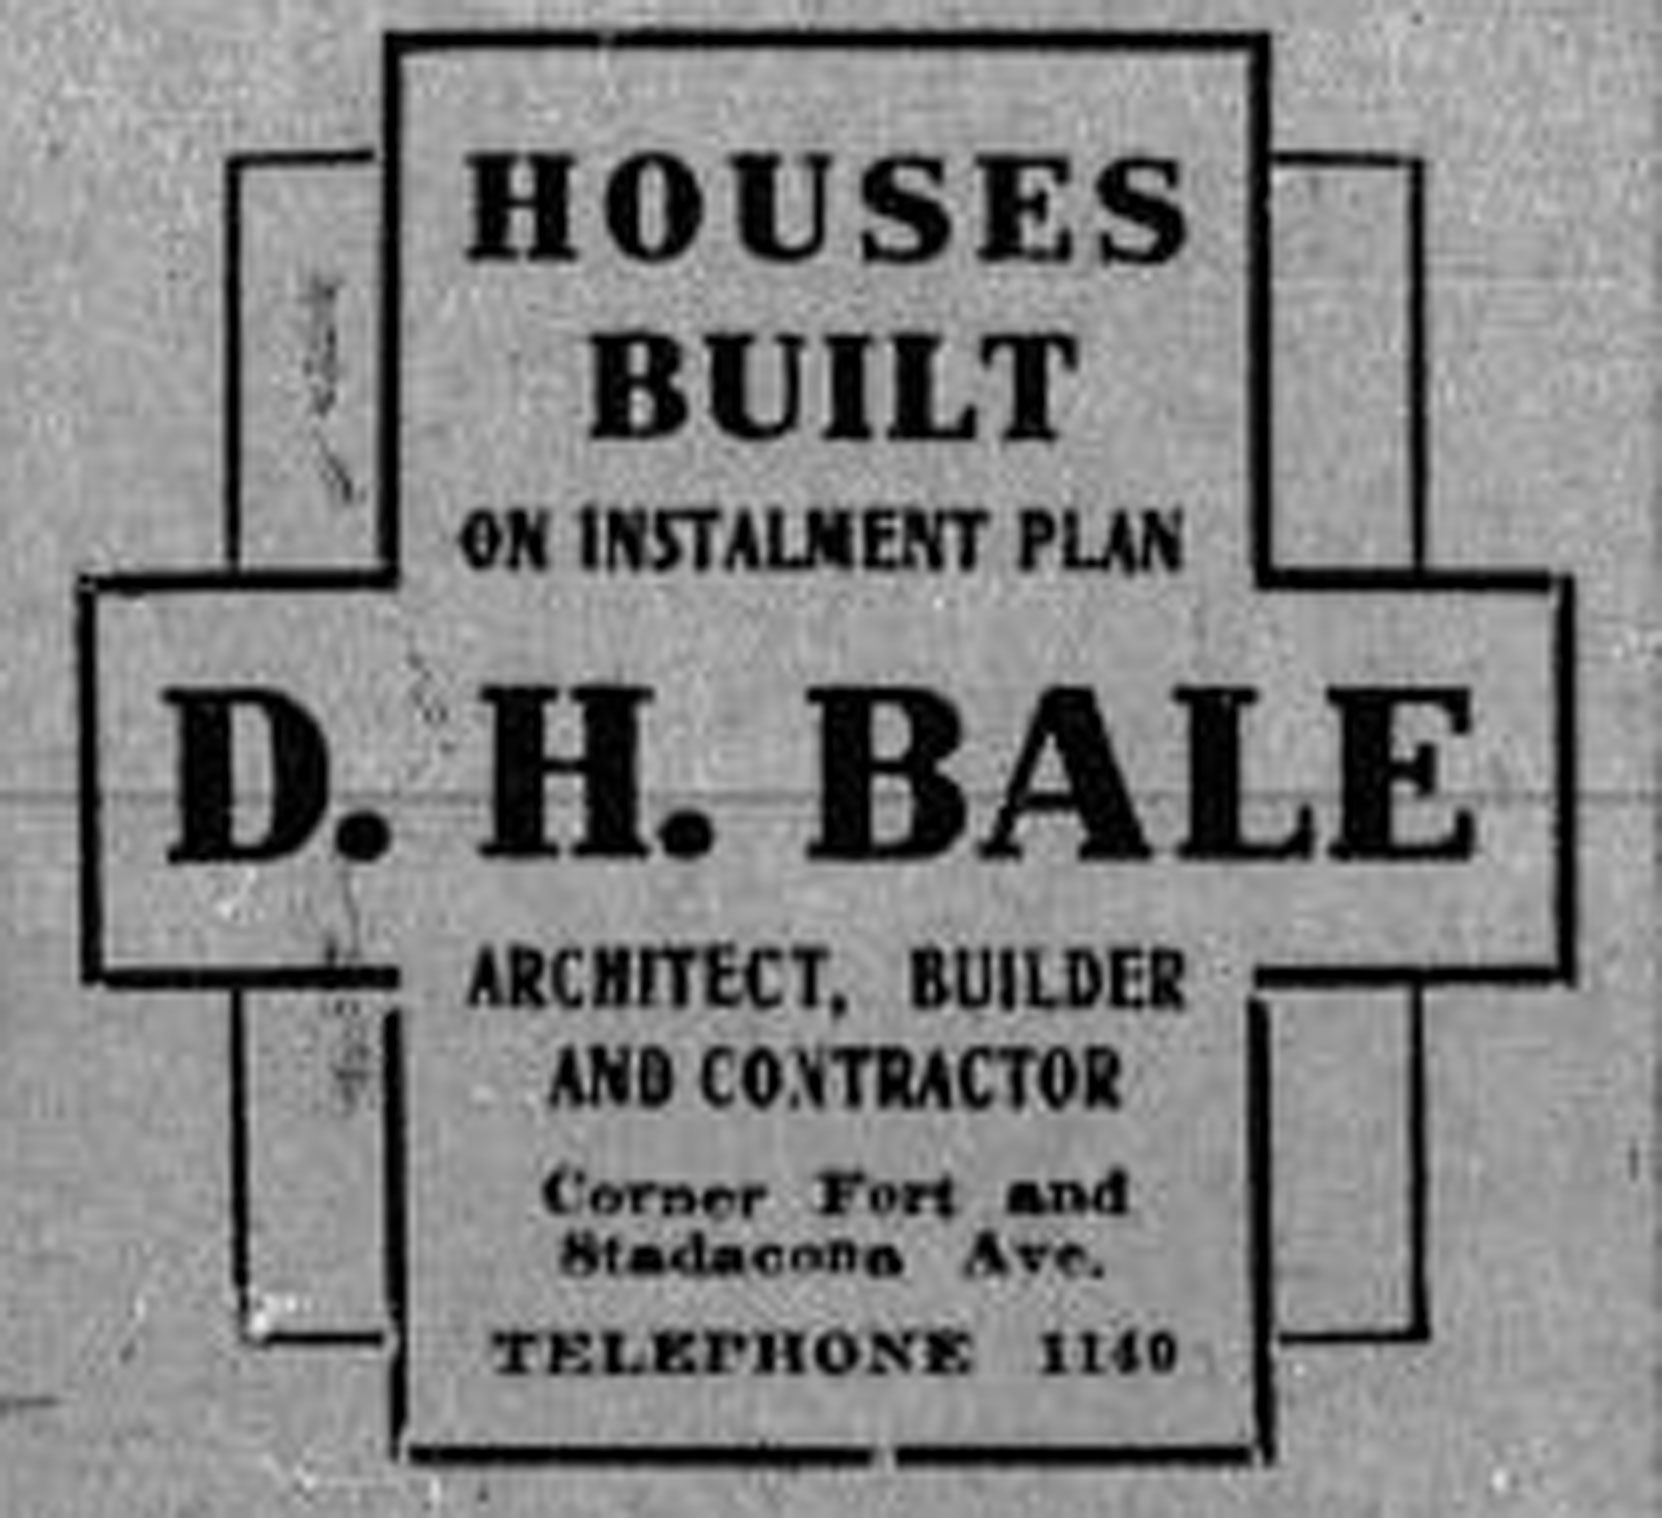 1913 advertisement for D.H. Bale, Architect, Builder And Contractor.